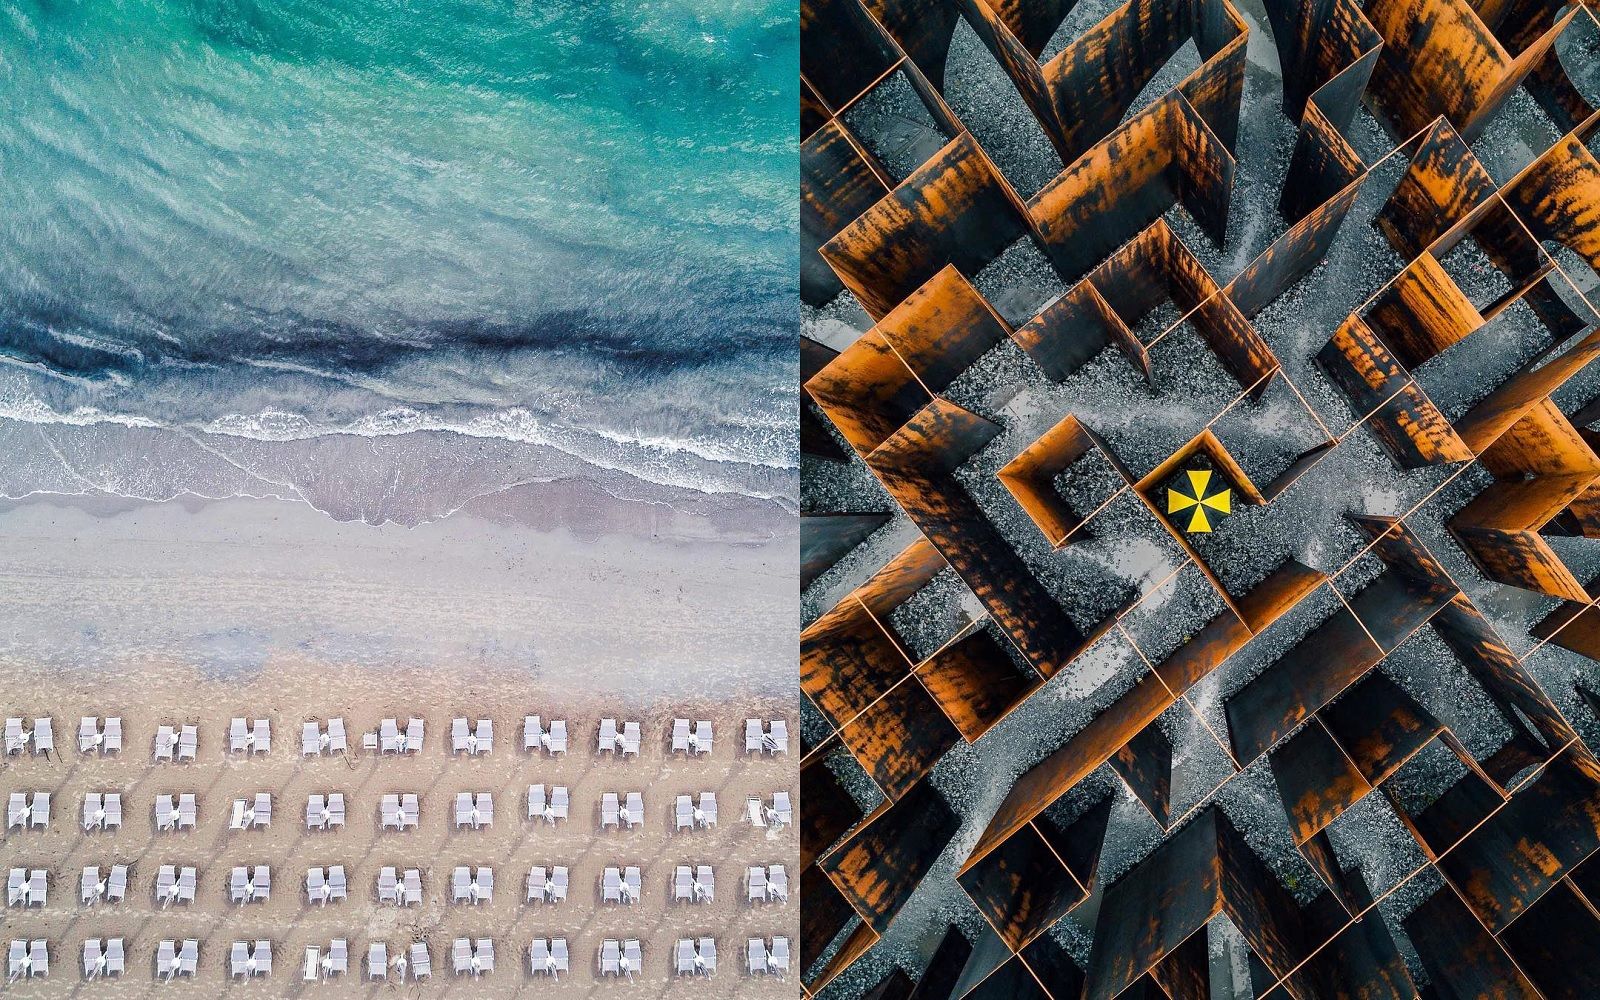 Astounding aerial photos or amazing abstract art?